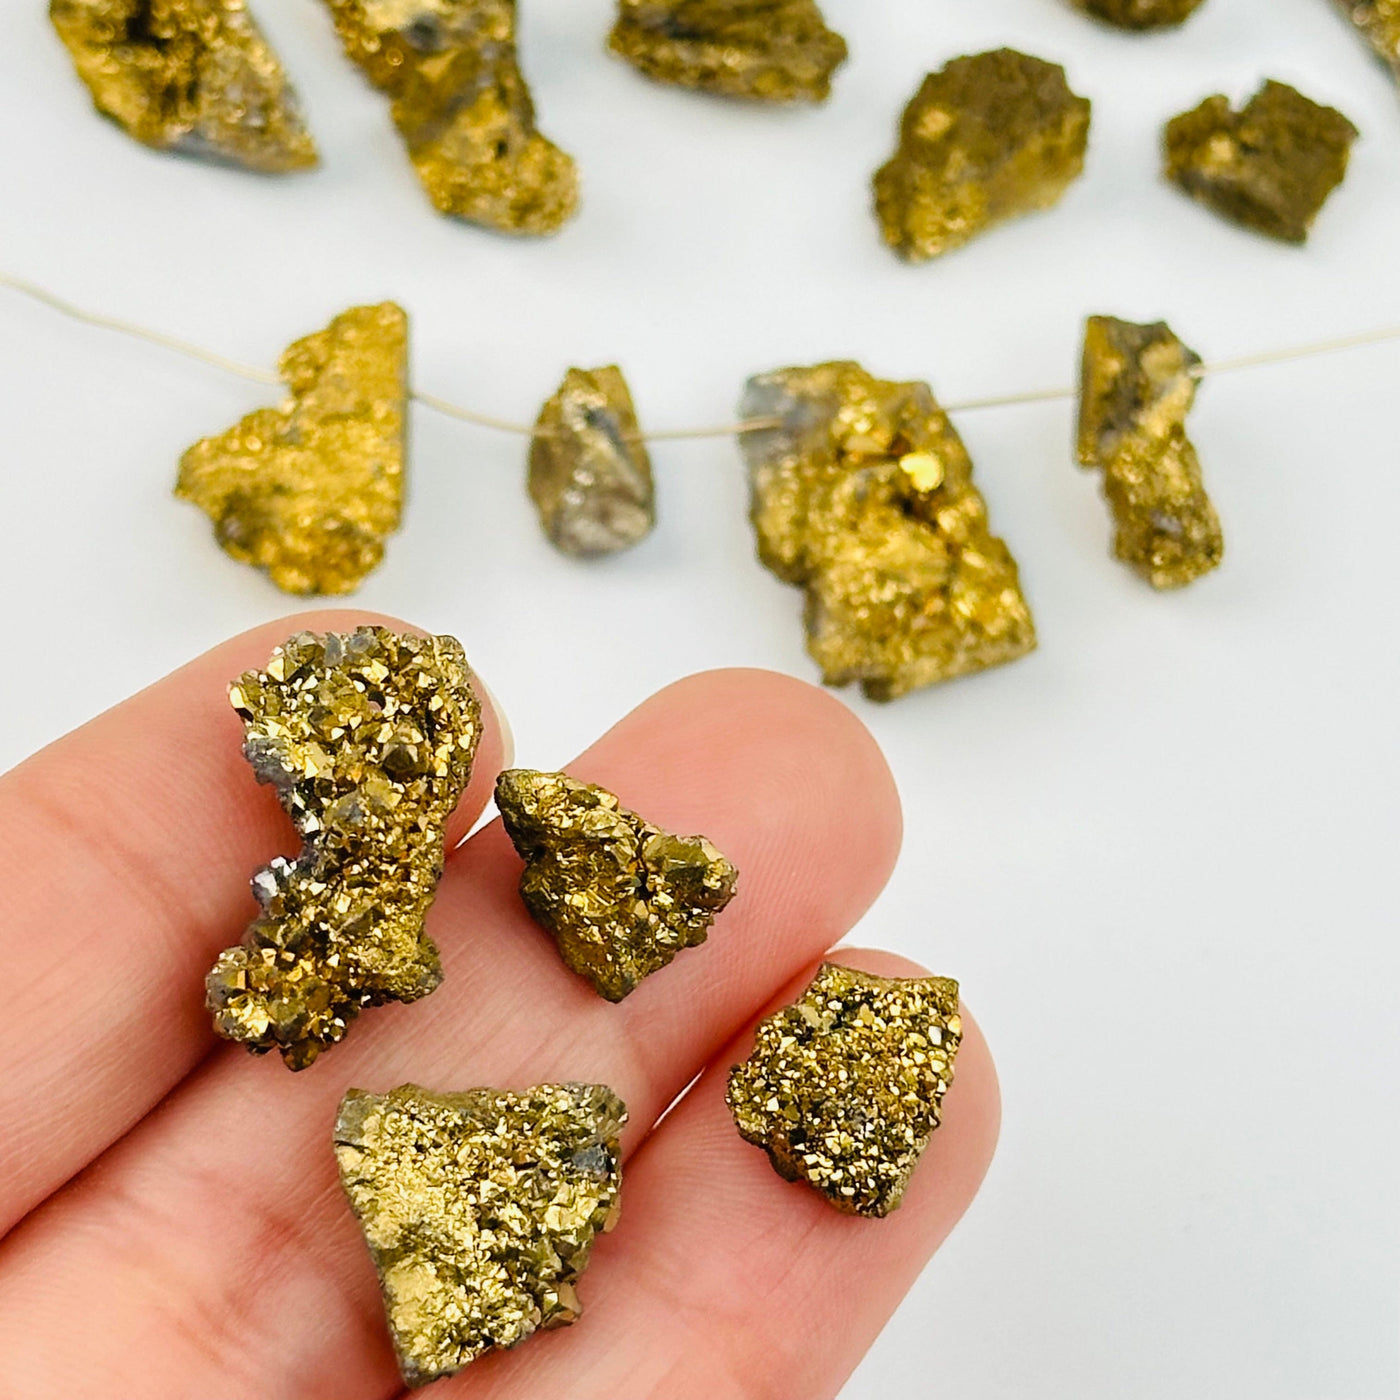 Gold Titanium Freeform Druzy Drilled Beads in hand for size reference 